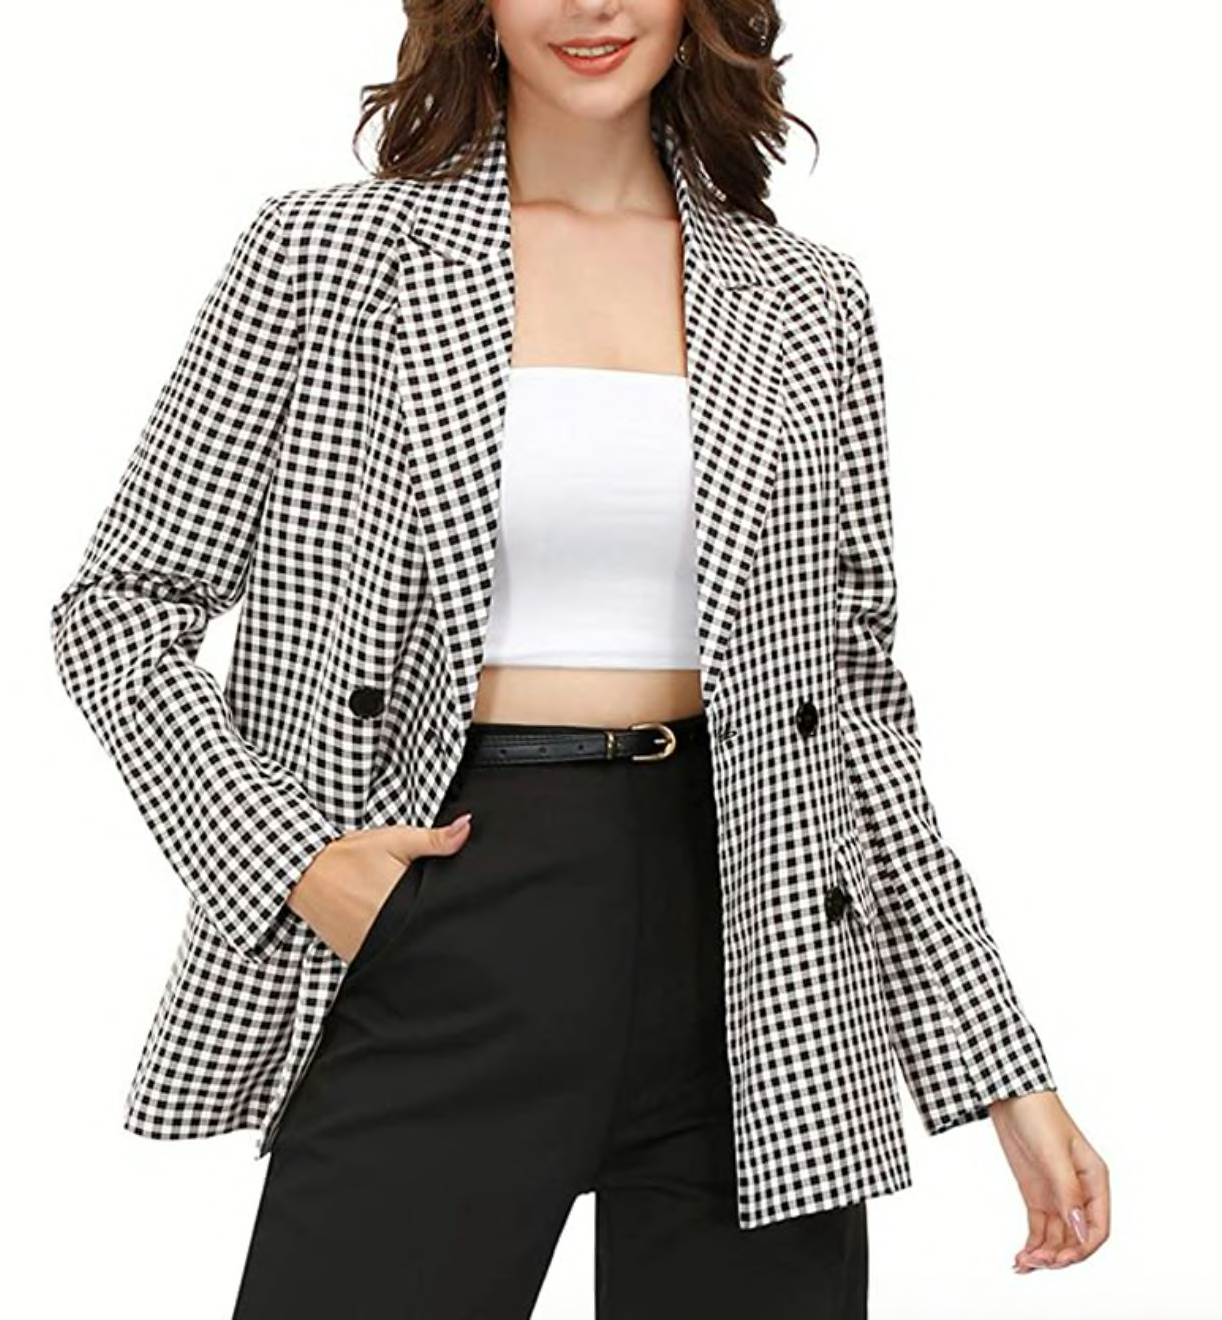 Feel Parisian by Getting the 'Emily in Paris' Plaid Blazer Look For Less